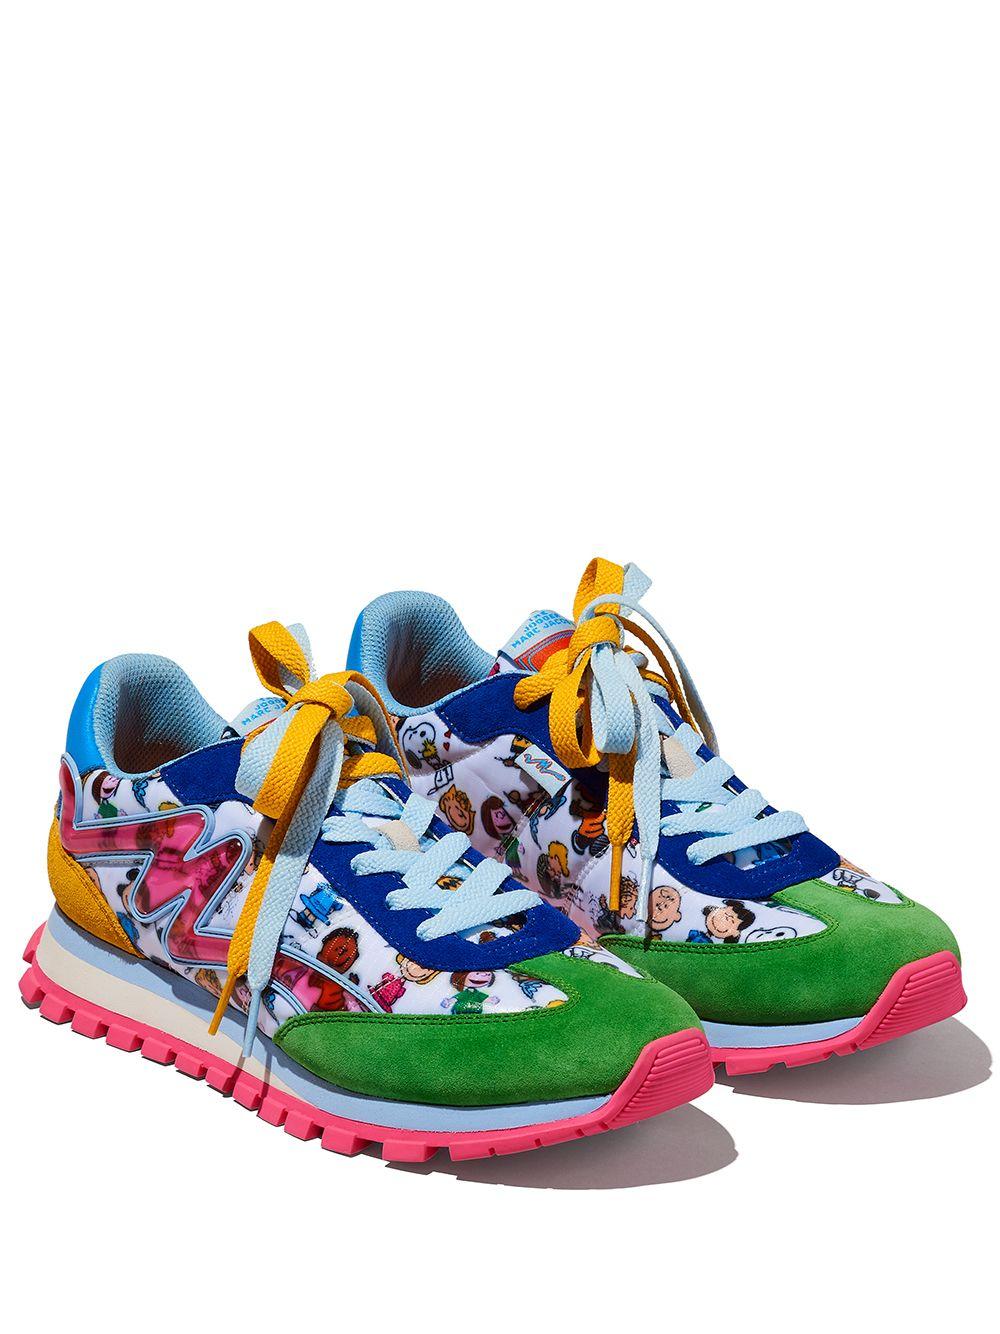 Marc Jacobs Cotton Peanuts X The Comics Jogger Sneakers in Blue | Lyst